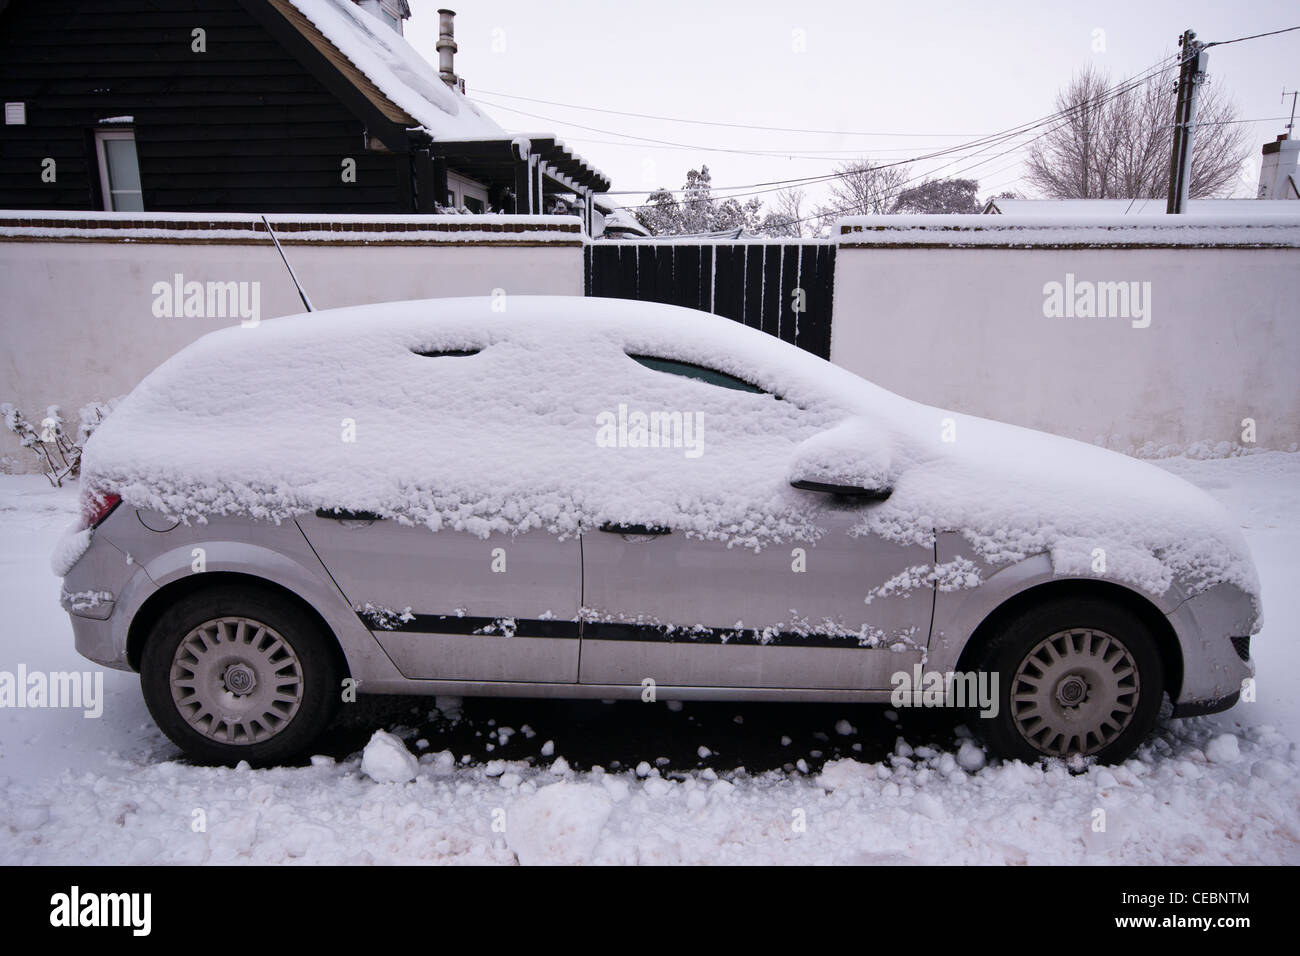 Snow Covered Parked Broken Down Car Vehicle After A Heavy Snowfall Stock Photo